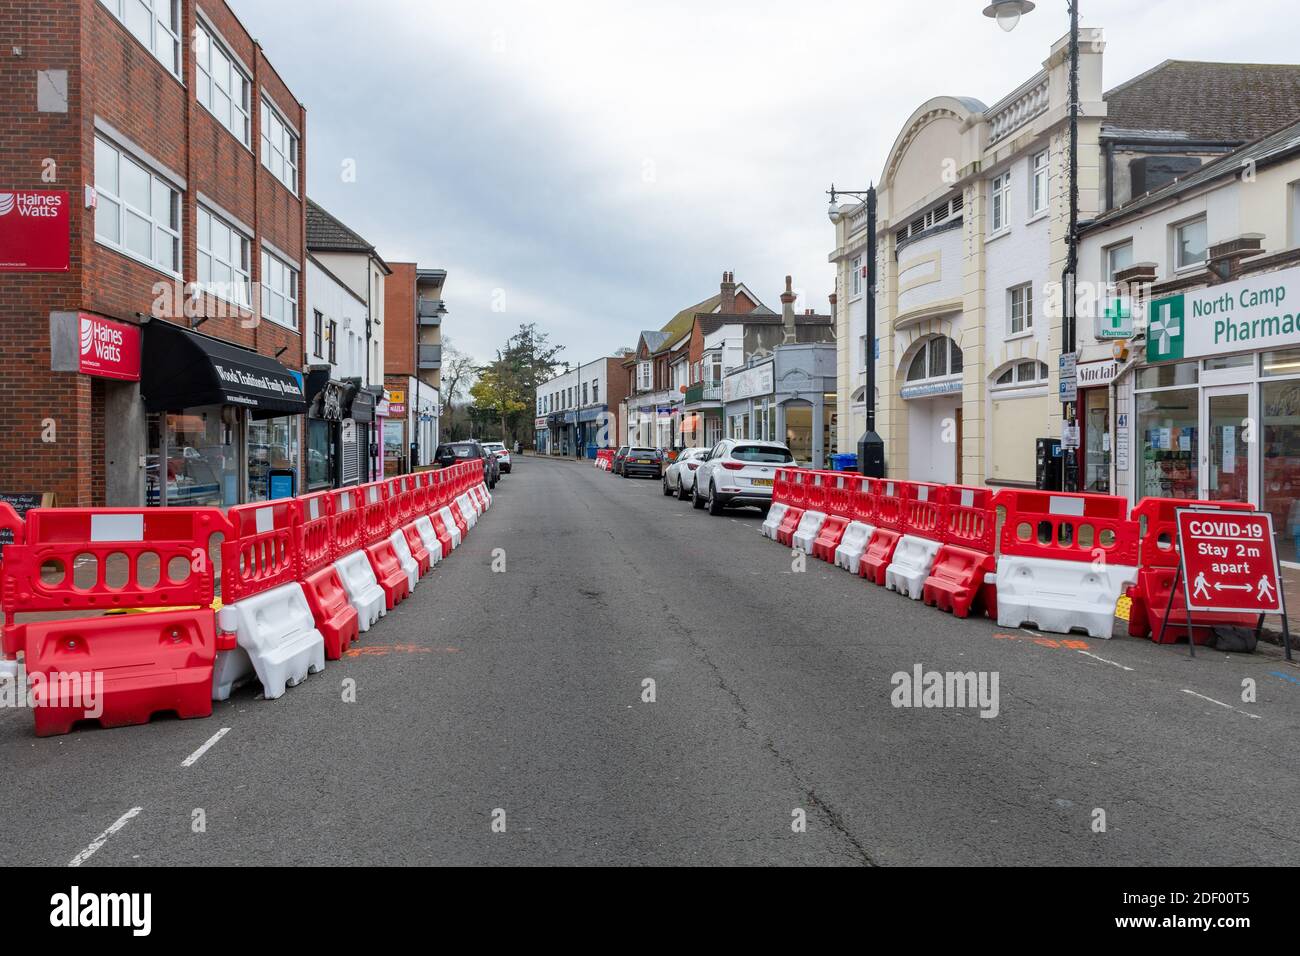 Temporary road alterations to allow social distancing for shoppers in UK town during the 2020 coronavirus covid-19 pandemic Stock Photo